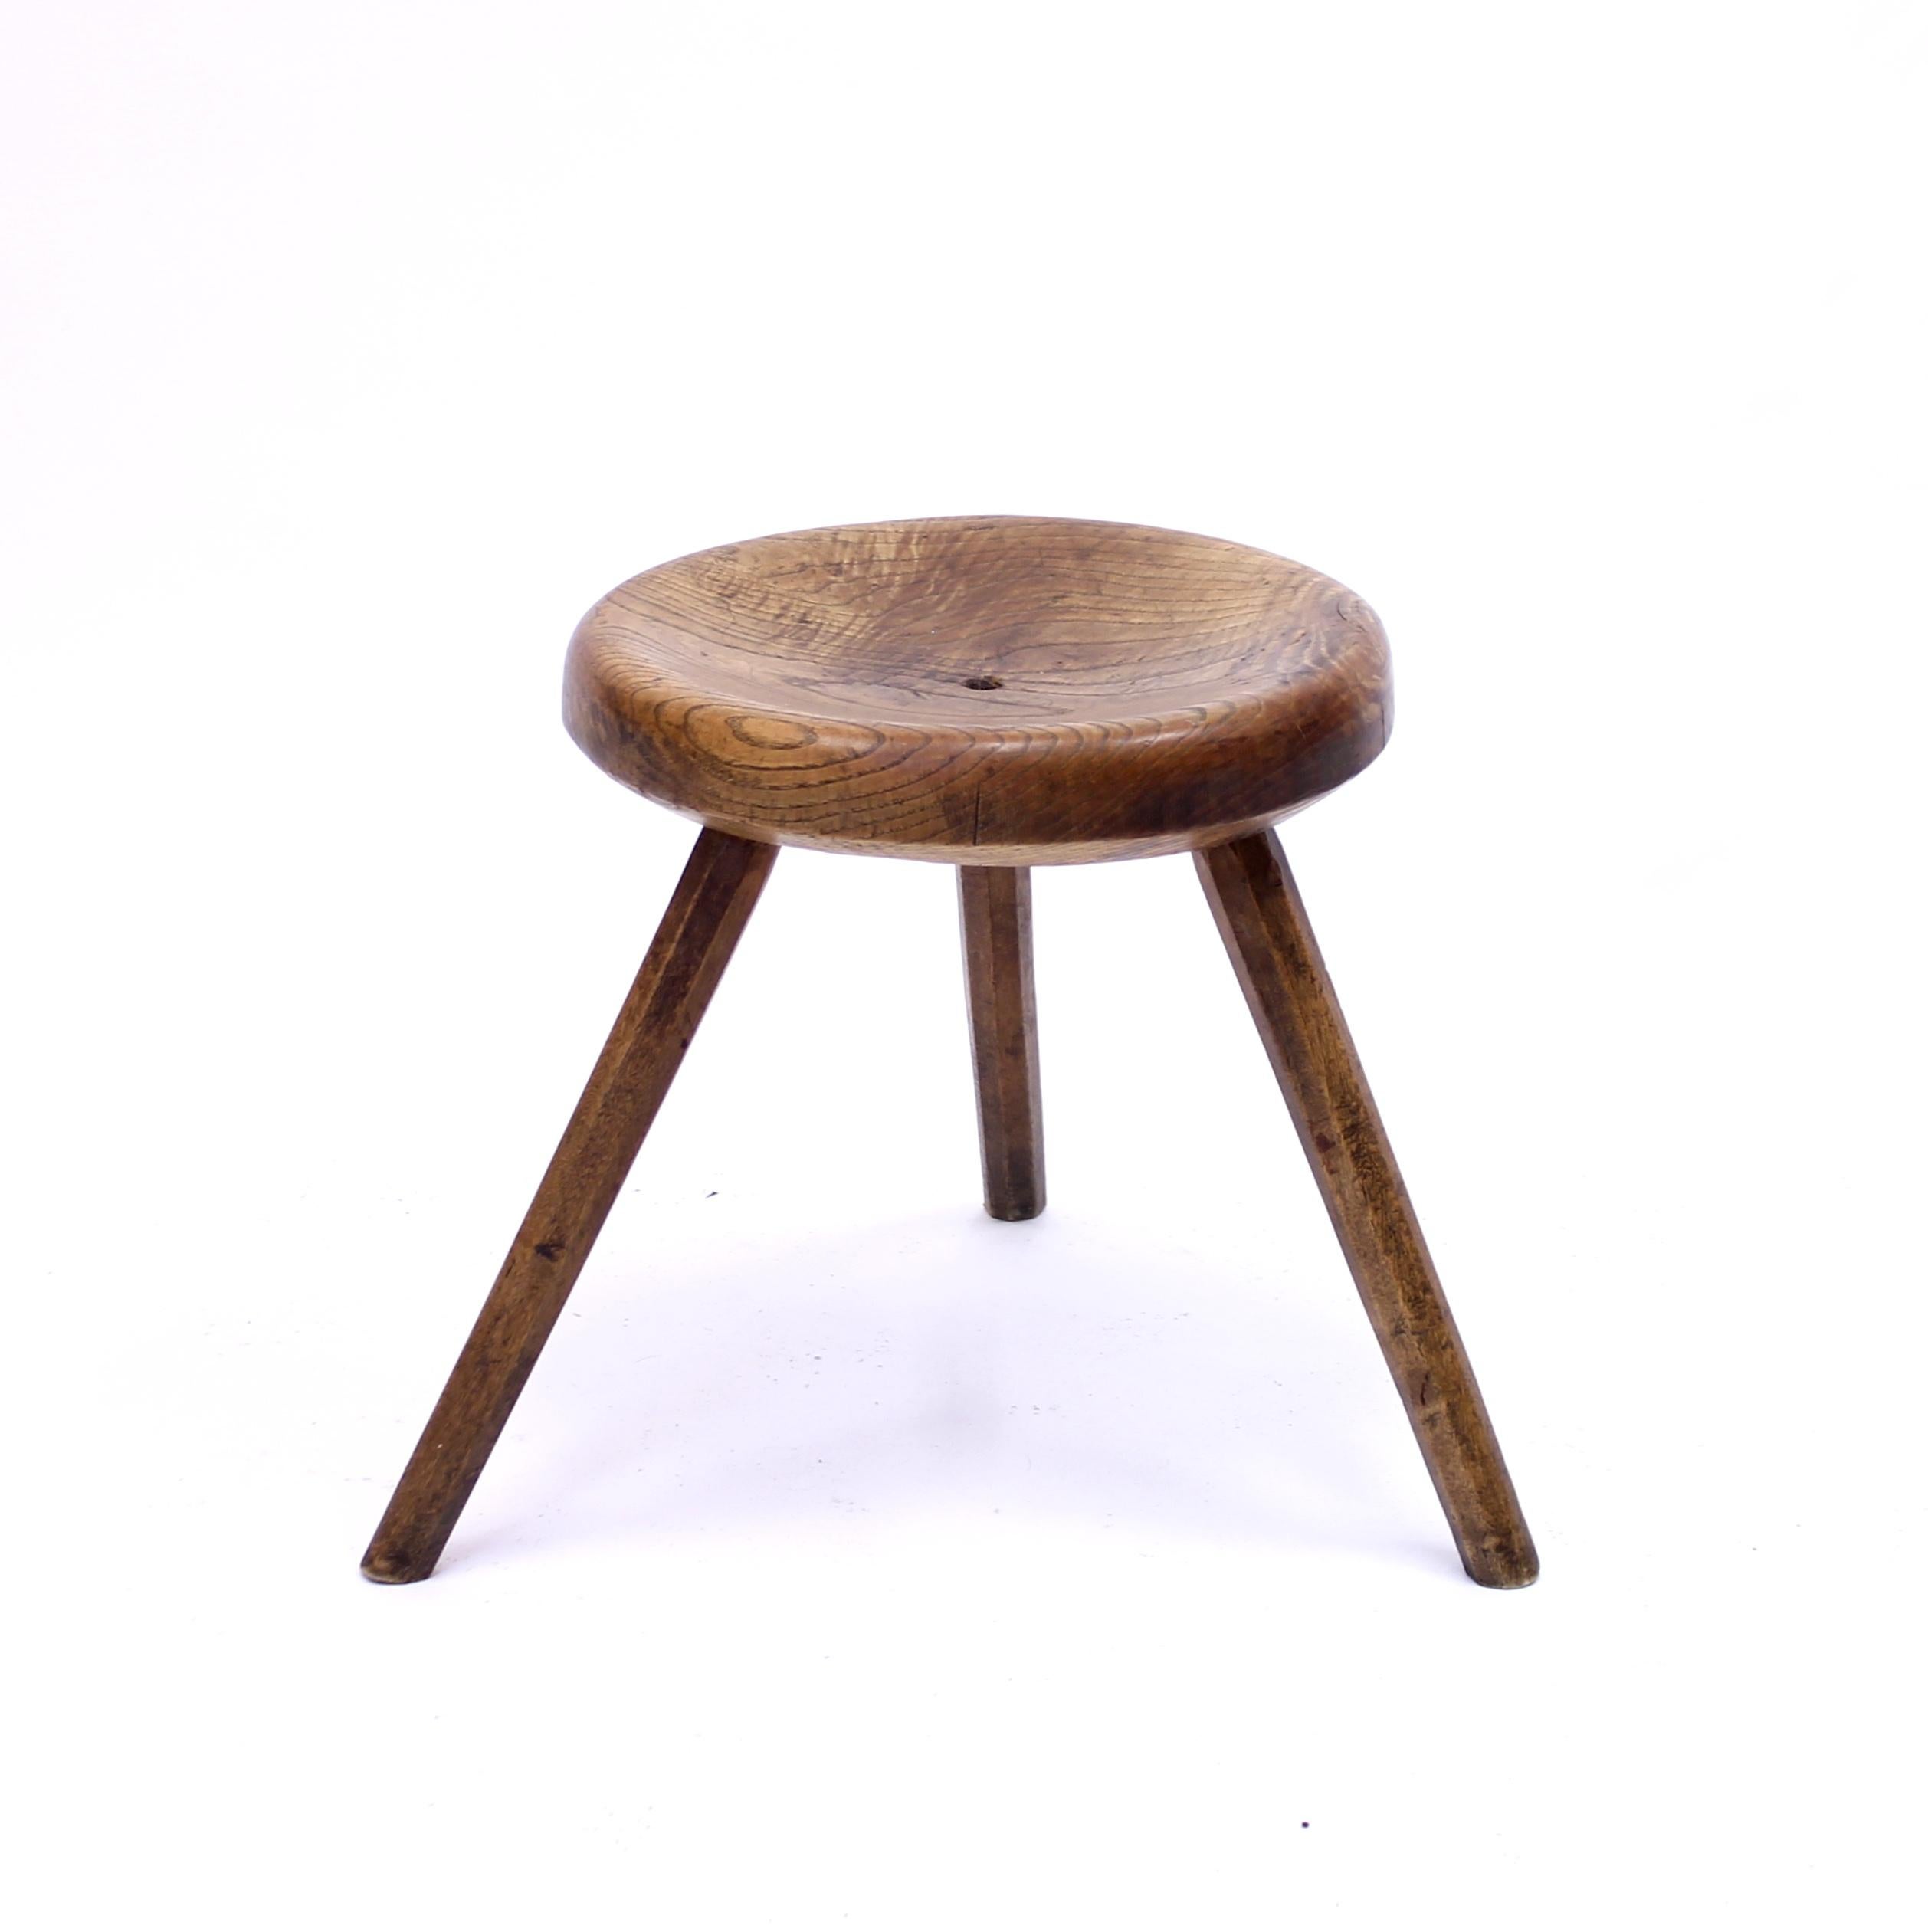 Rustic oak work stool from the mid 20th century featuring three octagonal legs and a round lathed seat. Charming and quite roughly made. Good vintage condition with light ware consistent with age and use.